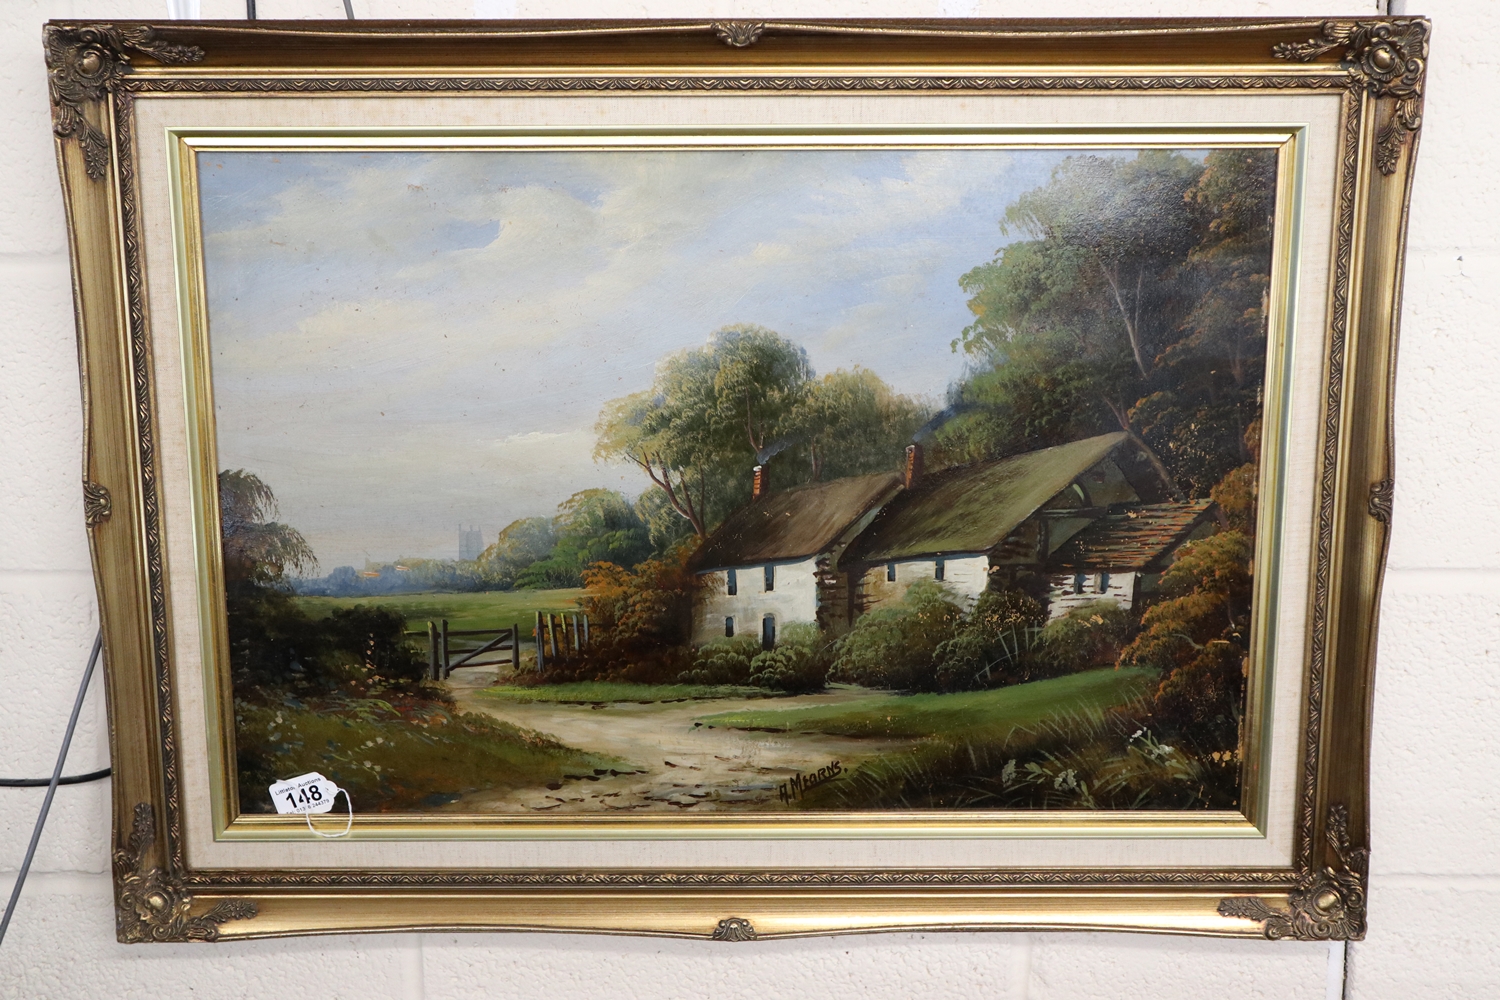 Oil on canvas by A Mearns - Cottages (Image size 73cm x 48cm)